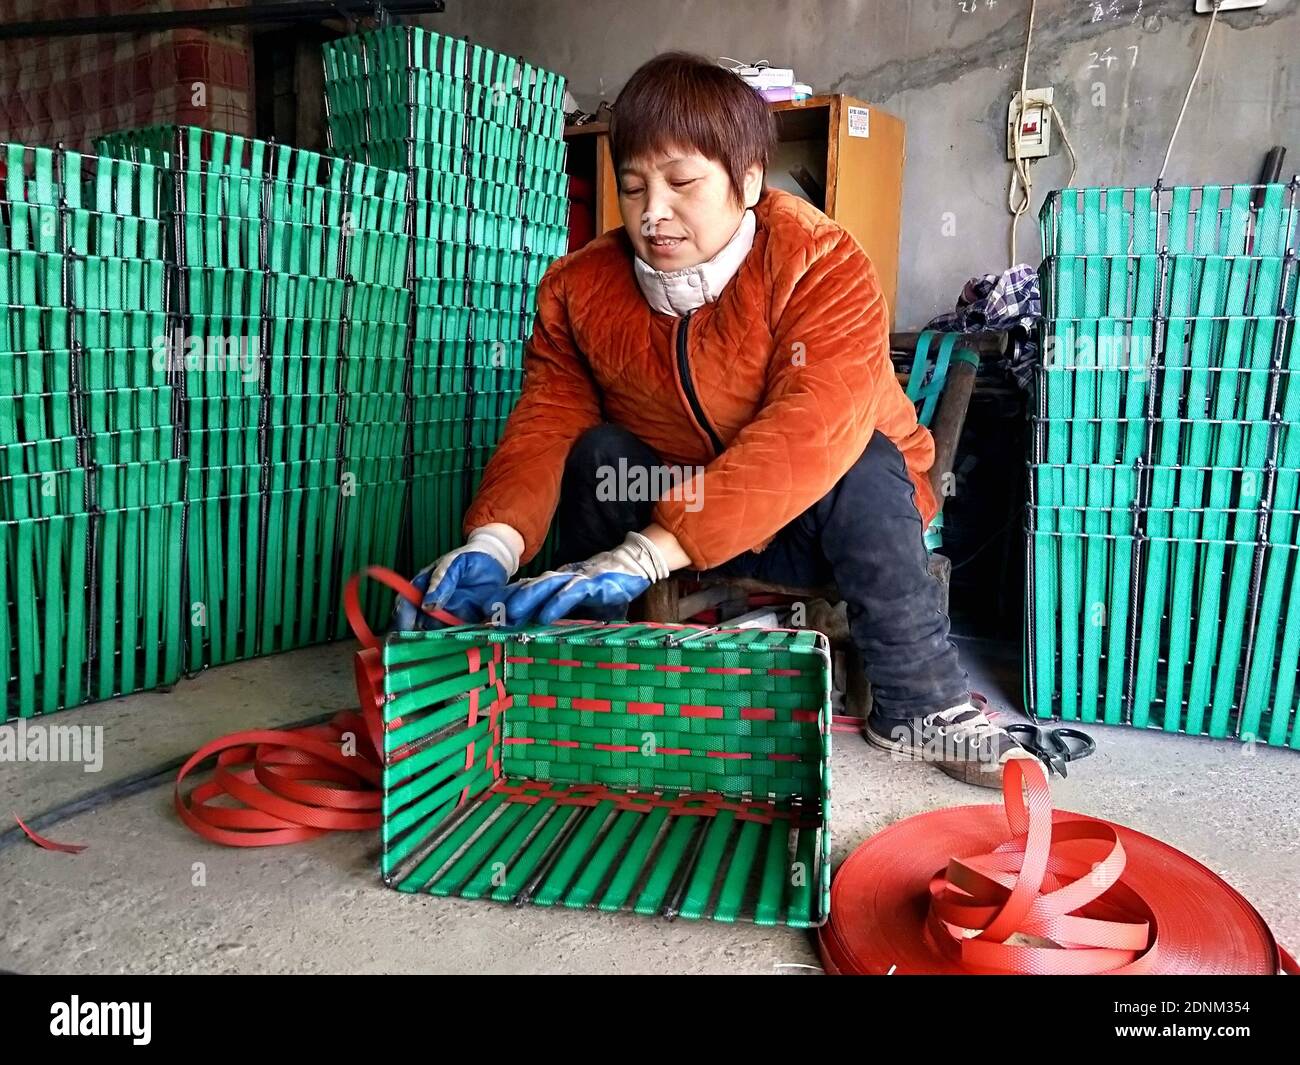 Yunmeng, Yunmeng, China. 18th Dec, 2020. Hubei, CHINA-On December 16, 2020, in Xiaogan City, Hubei Province, yuan Jinying, a disabled man with double legs, welded and woven steel frame basket at home.Disabled as she was, she not only made the house clean and tidy with her hardworking hands, but also helped her son finish his college education and finally lifted the family out of poverty.Introduced by villagers and friends, Yuan jinying's small workshop became increasingly famous.In 2018, the annual income of the small workshop reached 6,000 yuan, and Yuan Jinying became a banner of po Stock Photo